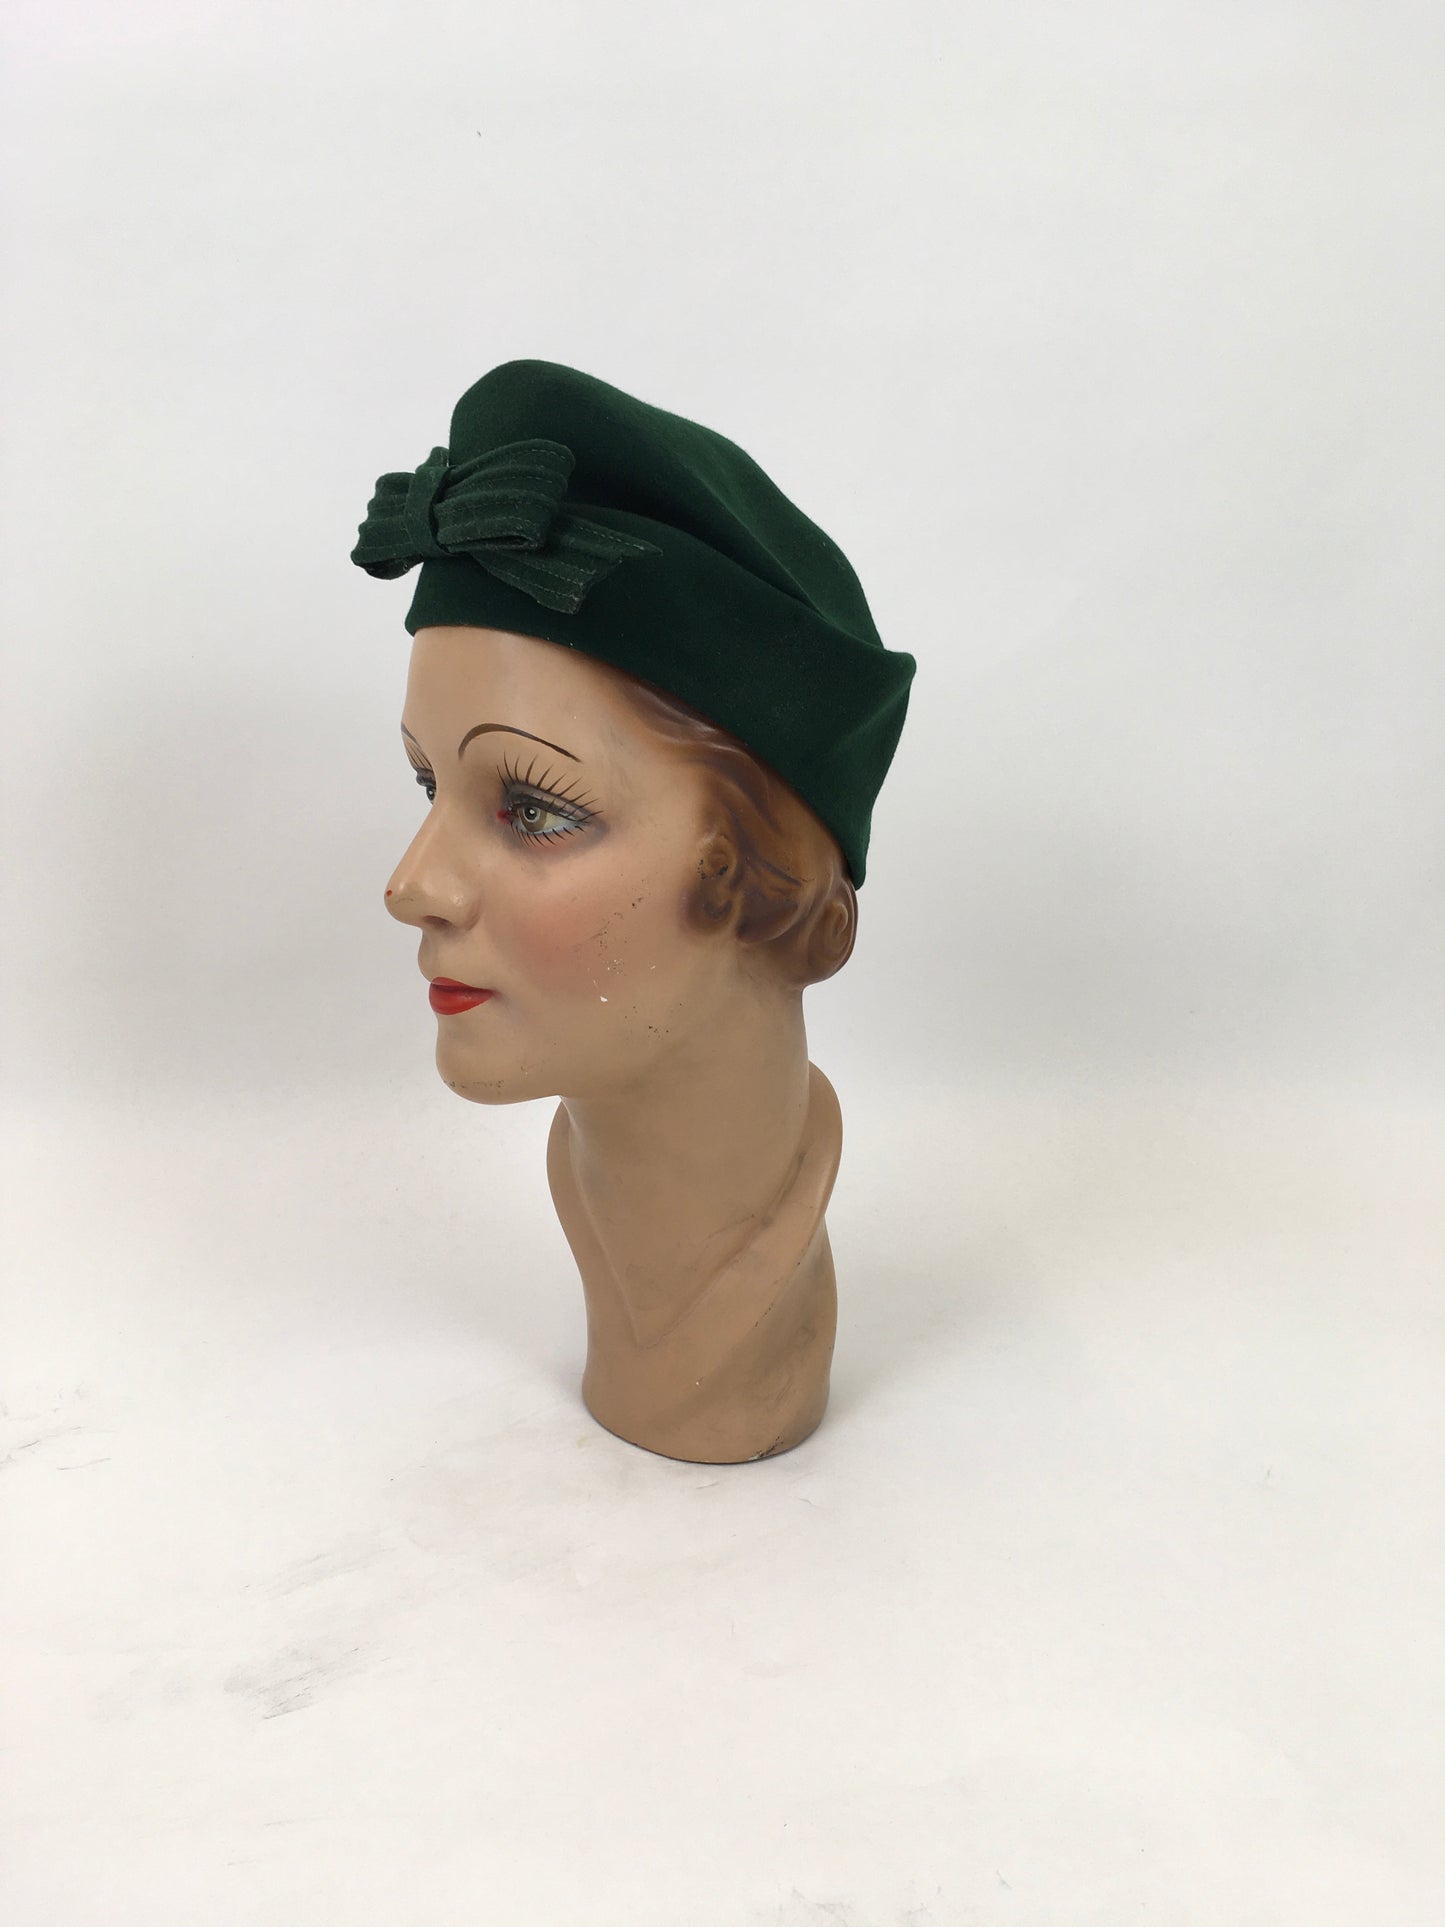 Original 1940's Stunning Hat - In A Bottle Green with Bow Accent